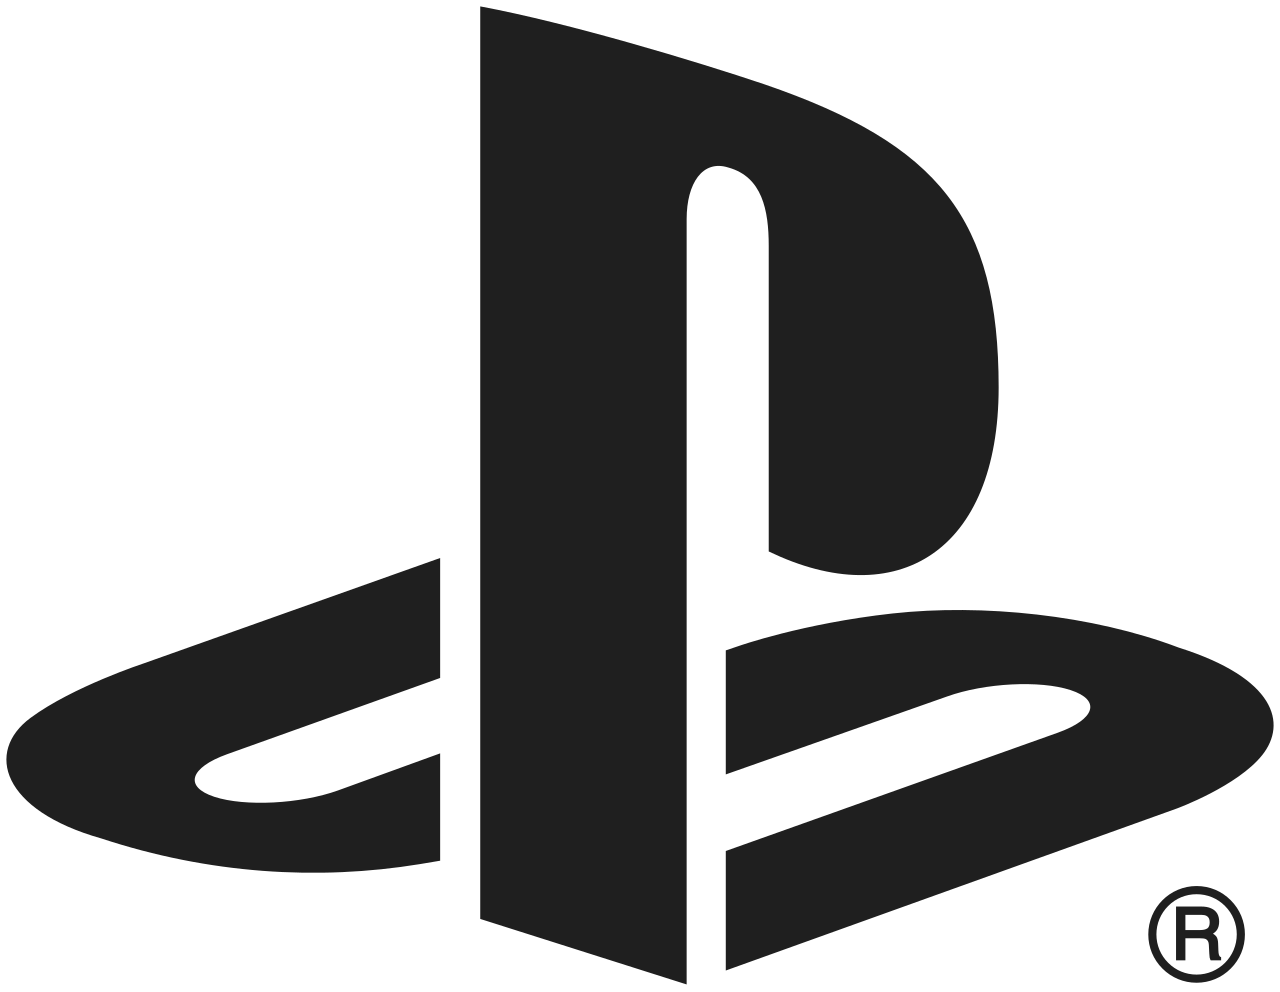 Official Playstation